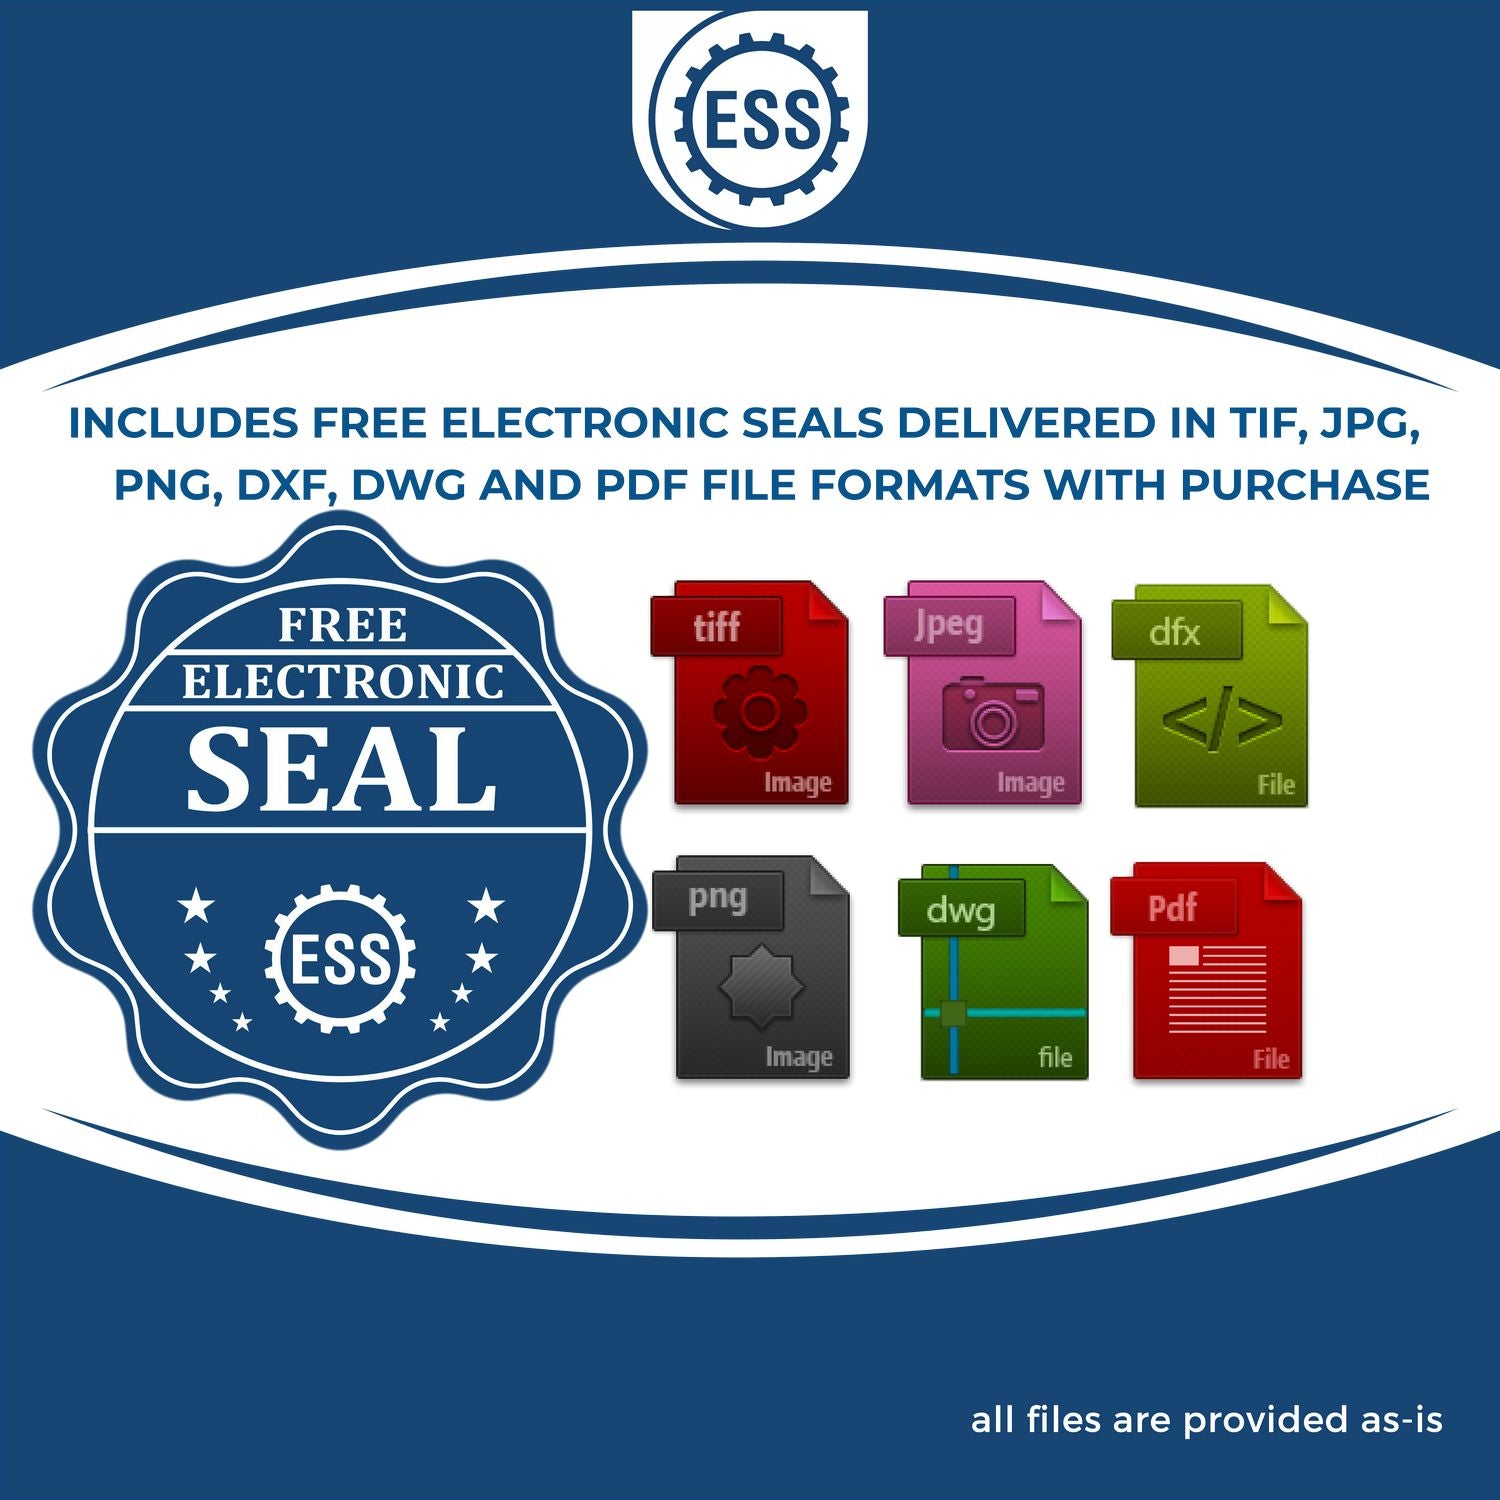 An infographic for the free electronic seal for the Kentucky Long Reach Landscape Architect Embossing Stamp illustrating the different file type icons such as DXF, DWG, TIF, JPG and PNG.